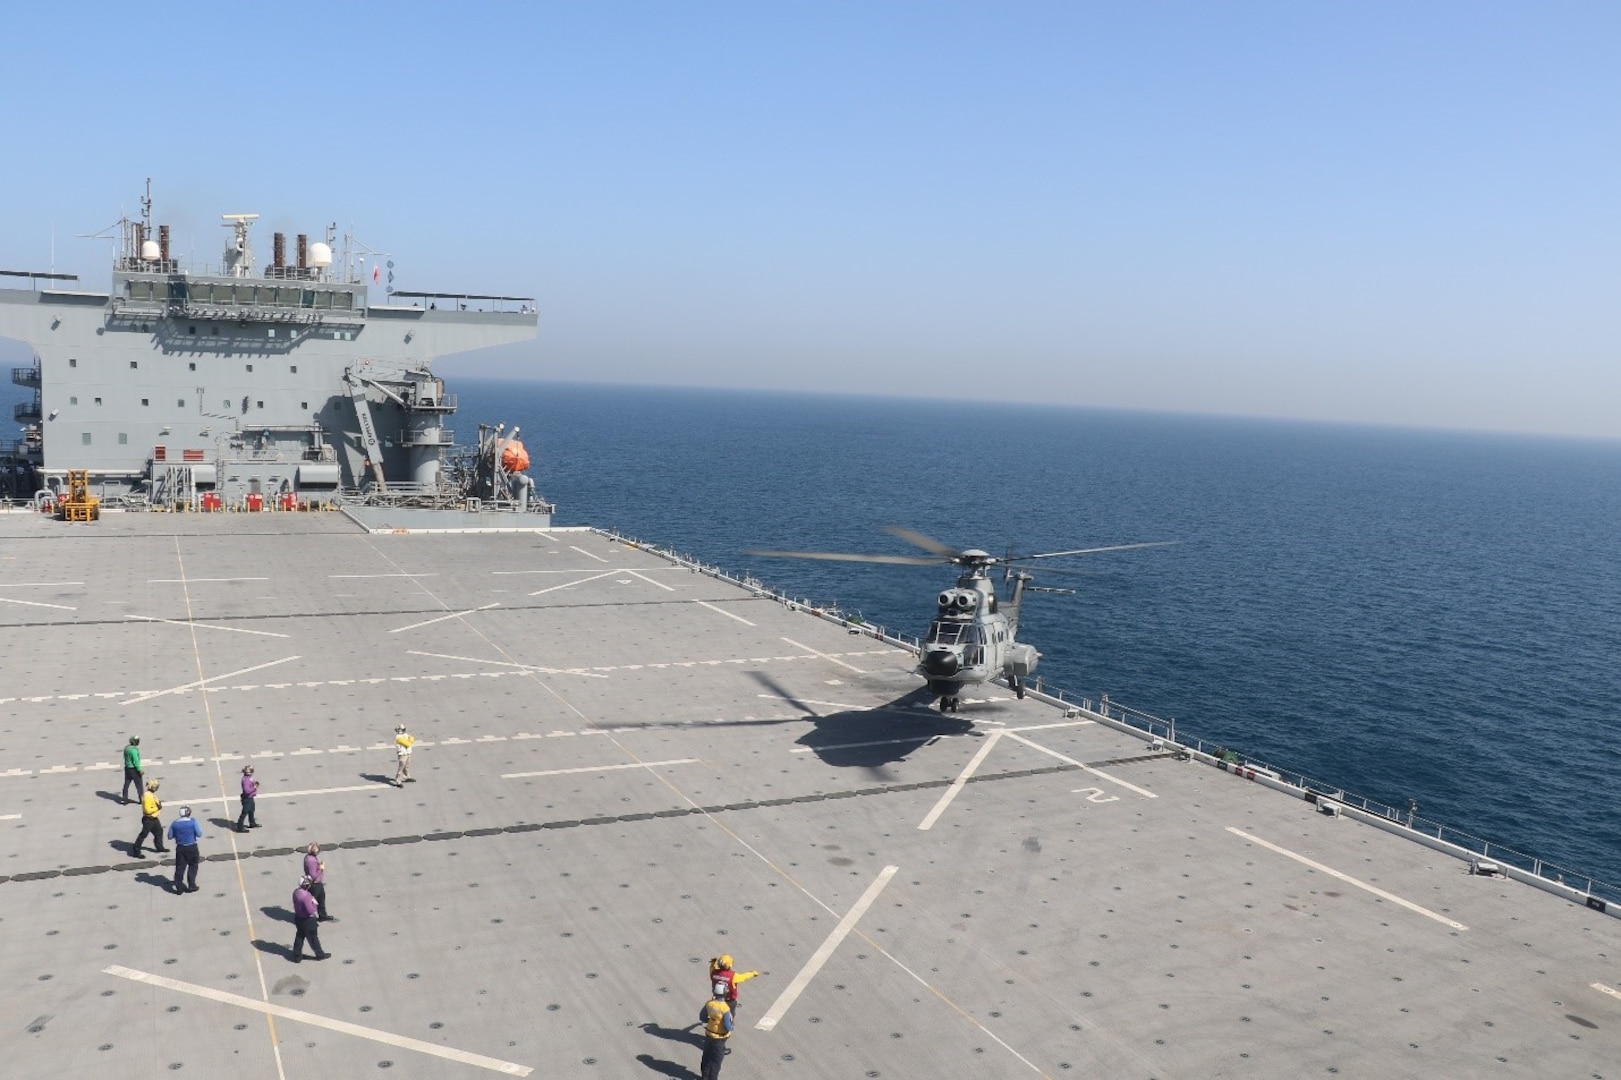 230224-N-NO146-1001 ARABIAN GULF (Feb. 24, 2023) – A United Arab Emirates Armed Forces AS332 Super Puma conducts deck landing qualifications aboard expeditionary sea base USS Lewis B. Puller (ESB 3) in the Arabian Gulf, Feb. 24, 2023. Puller is deployed to the U.S. 5th Fleet area of operations to help ensure maritime security and stability in the Middle East region.